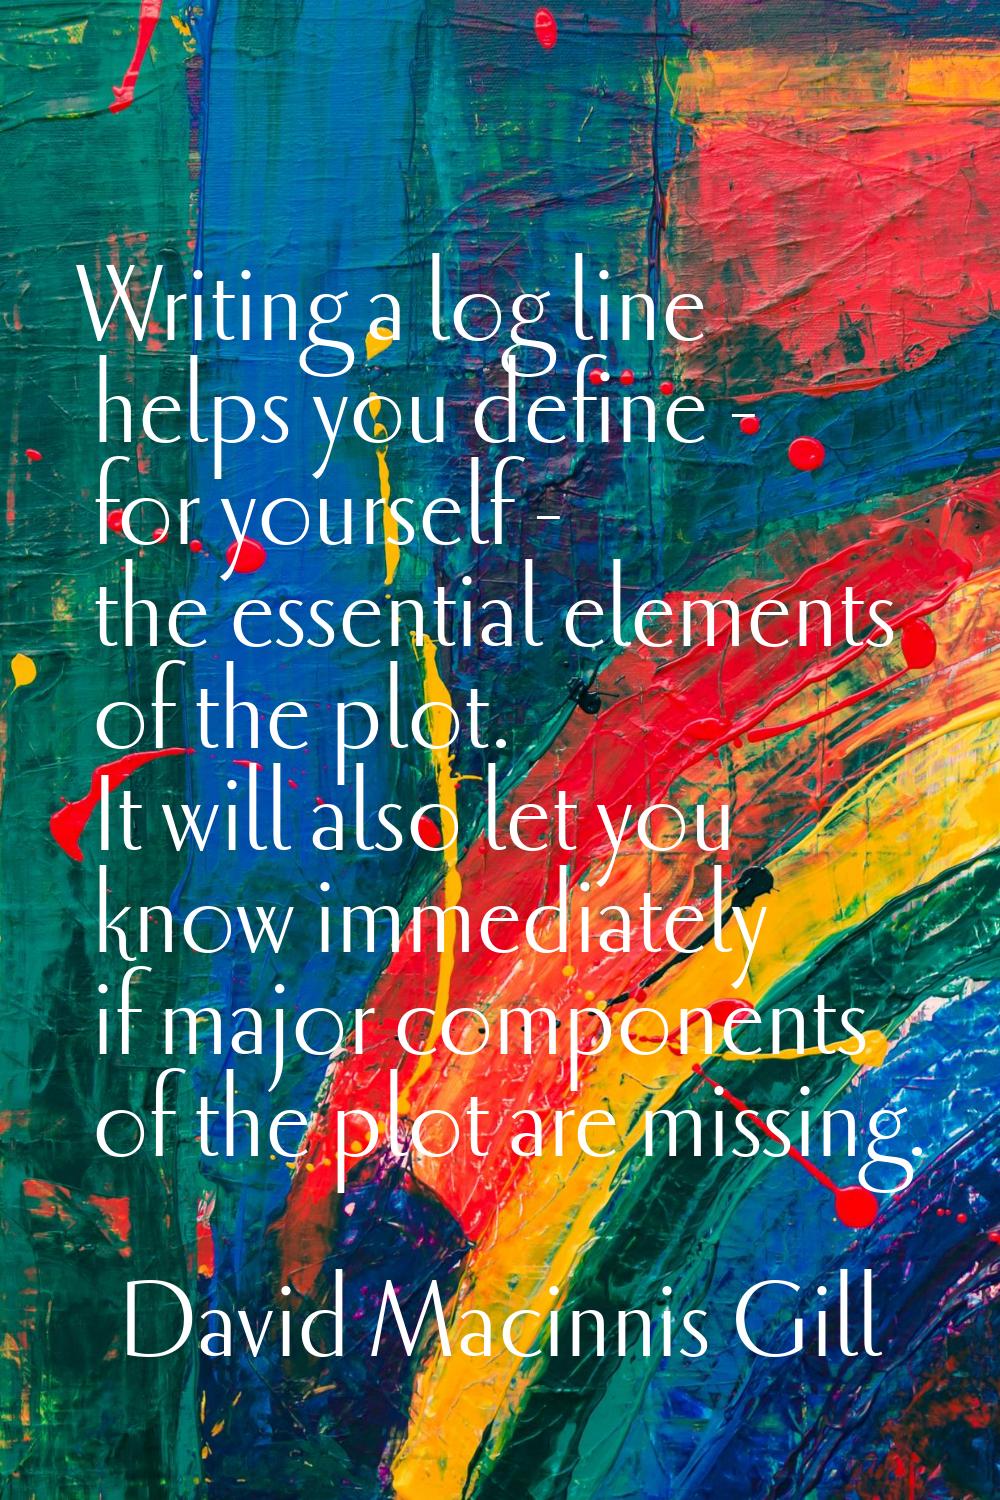 Writing a log line helps you define - for yourself - the essential elements of the plot. It will al